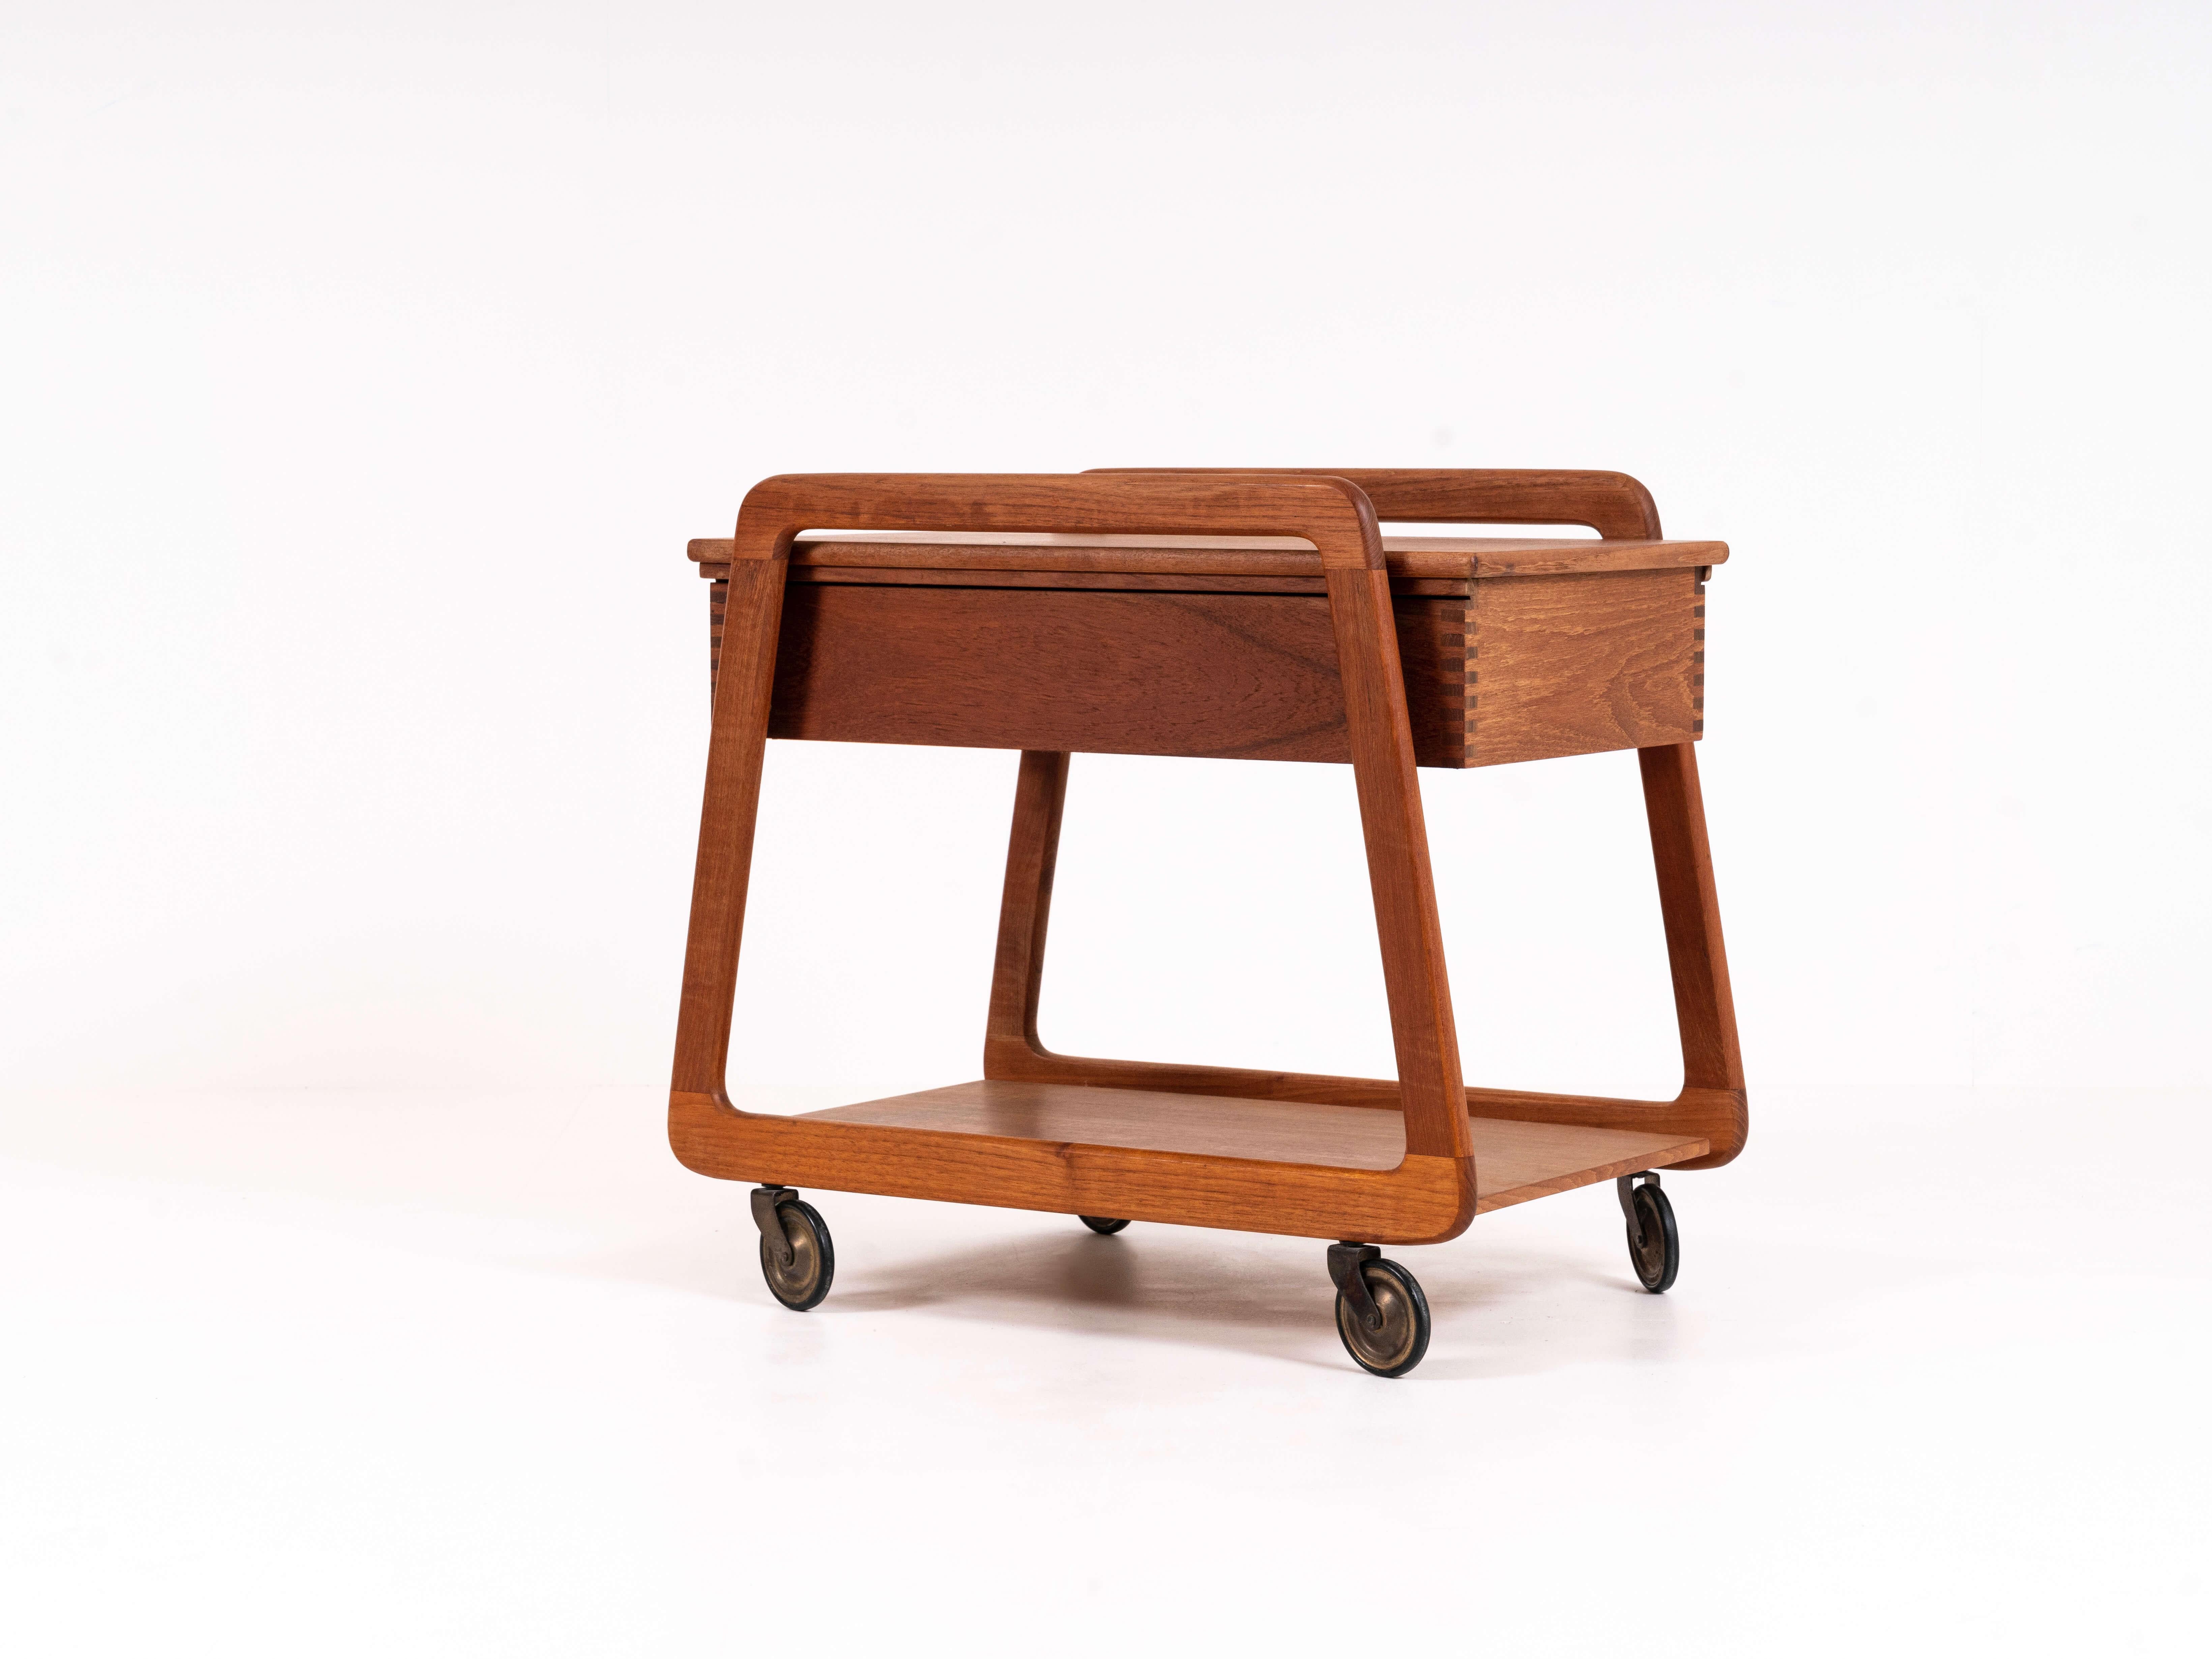 Charming Sika Møbler serving trolley in teak from Denmark in the 1960s. This trolley can swivel and is very practical. It has a drawer on the inside with boxes, schip probably tells you this originally is a sewing trolley. Very practical to use as a